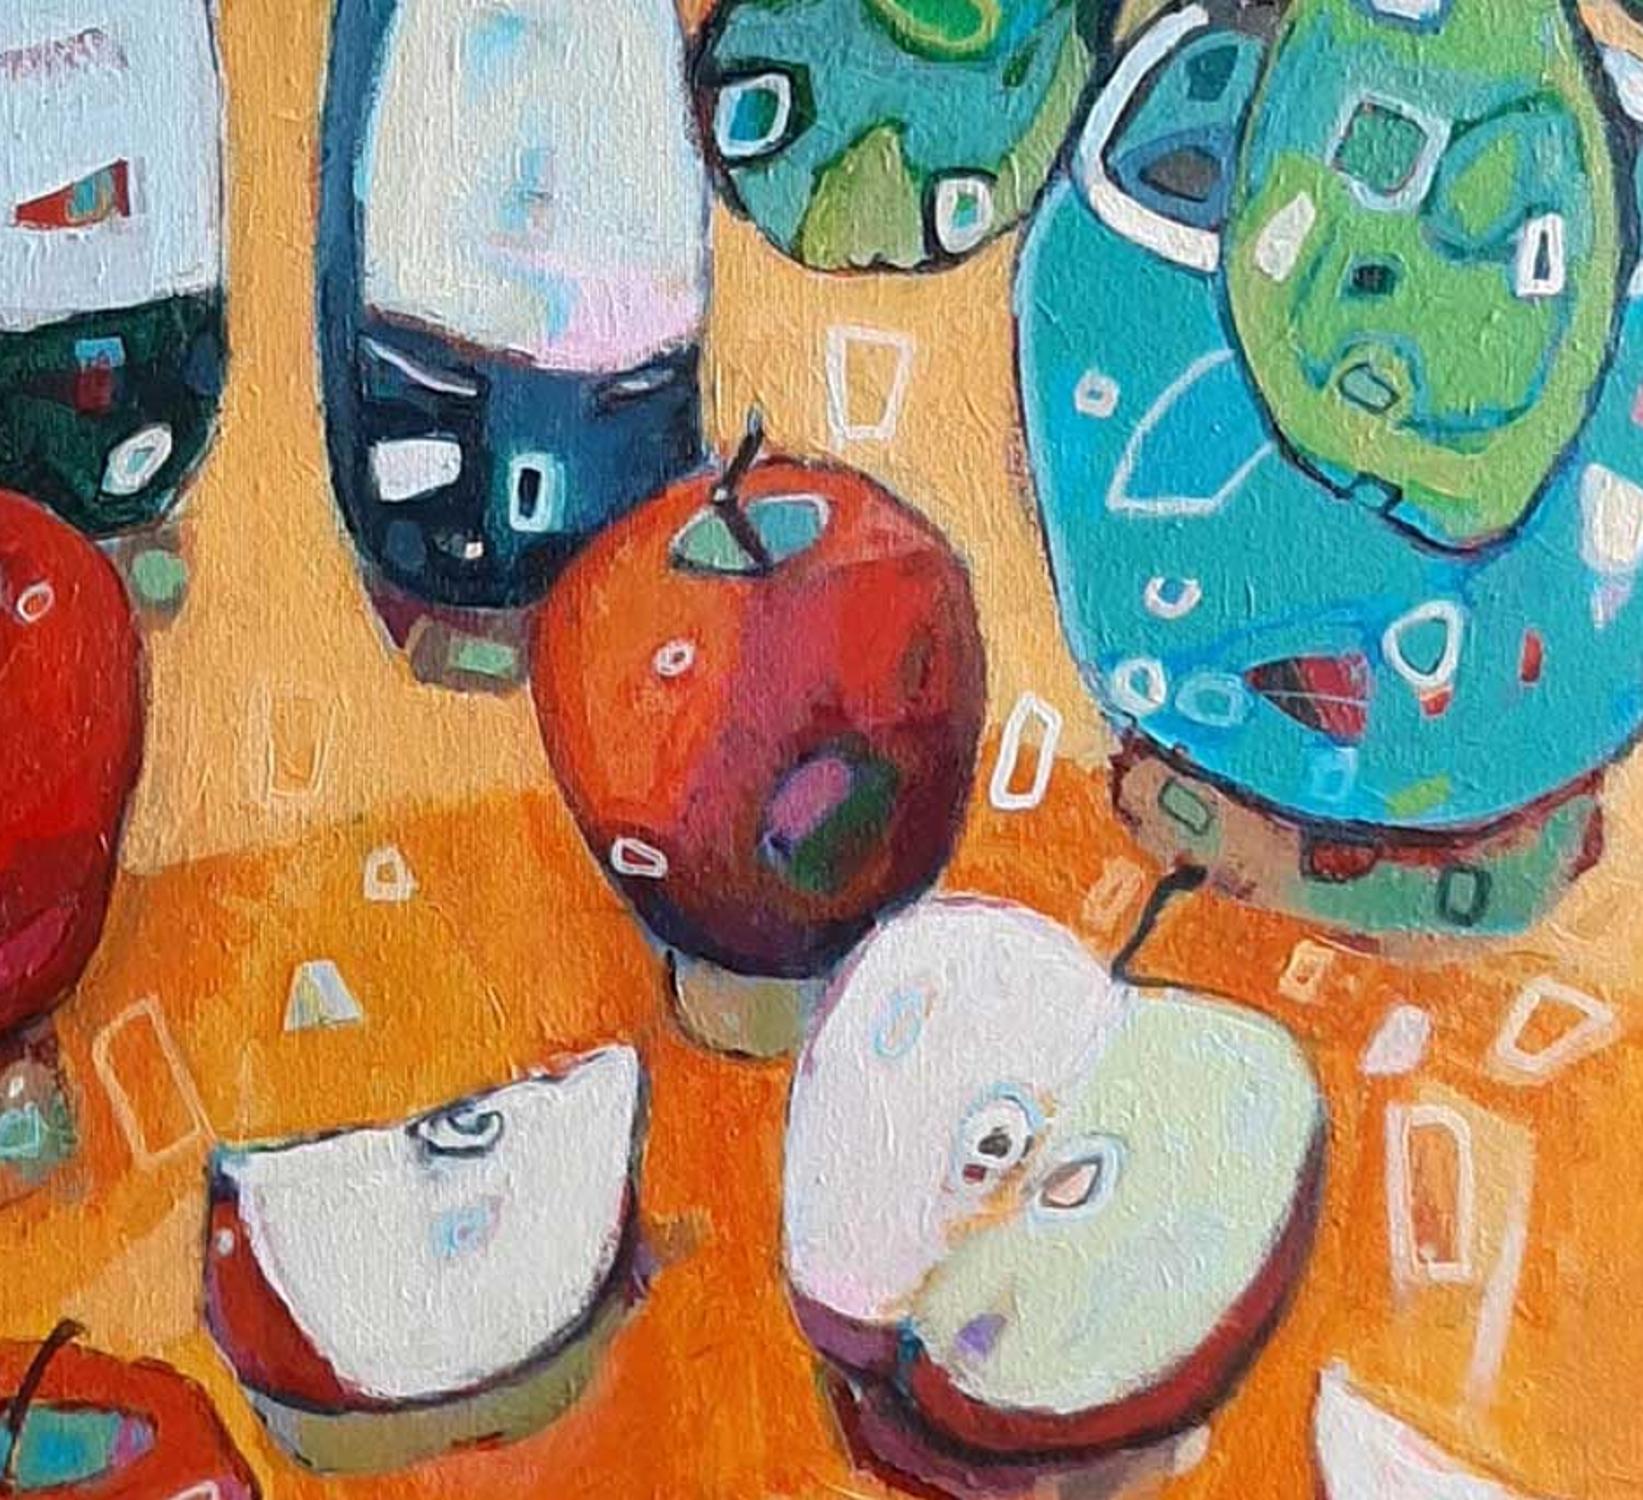 Apples on an Orange Table - Colourful Everyday Still Life: Acrylic on Canvas - Painting by Ania Pieniazek